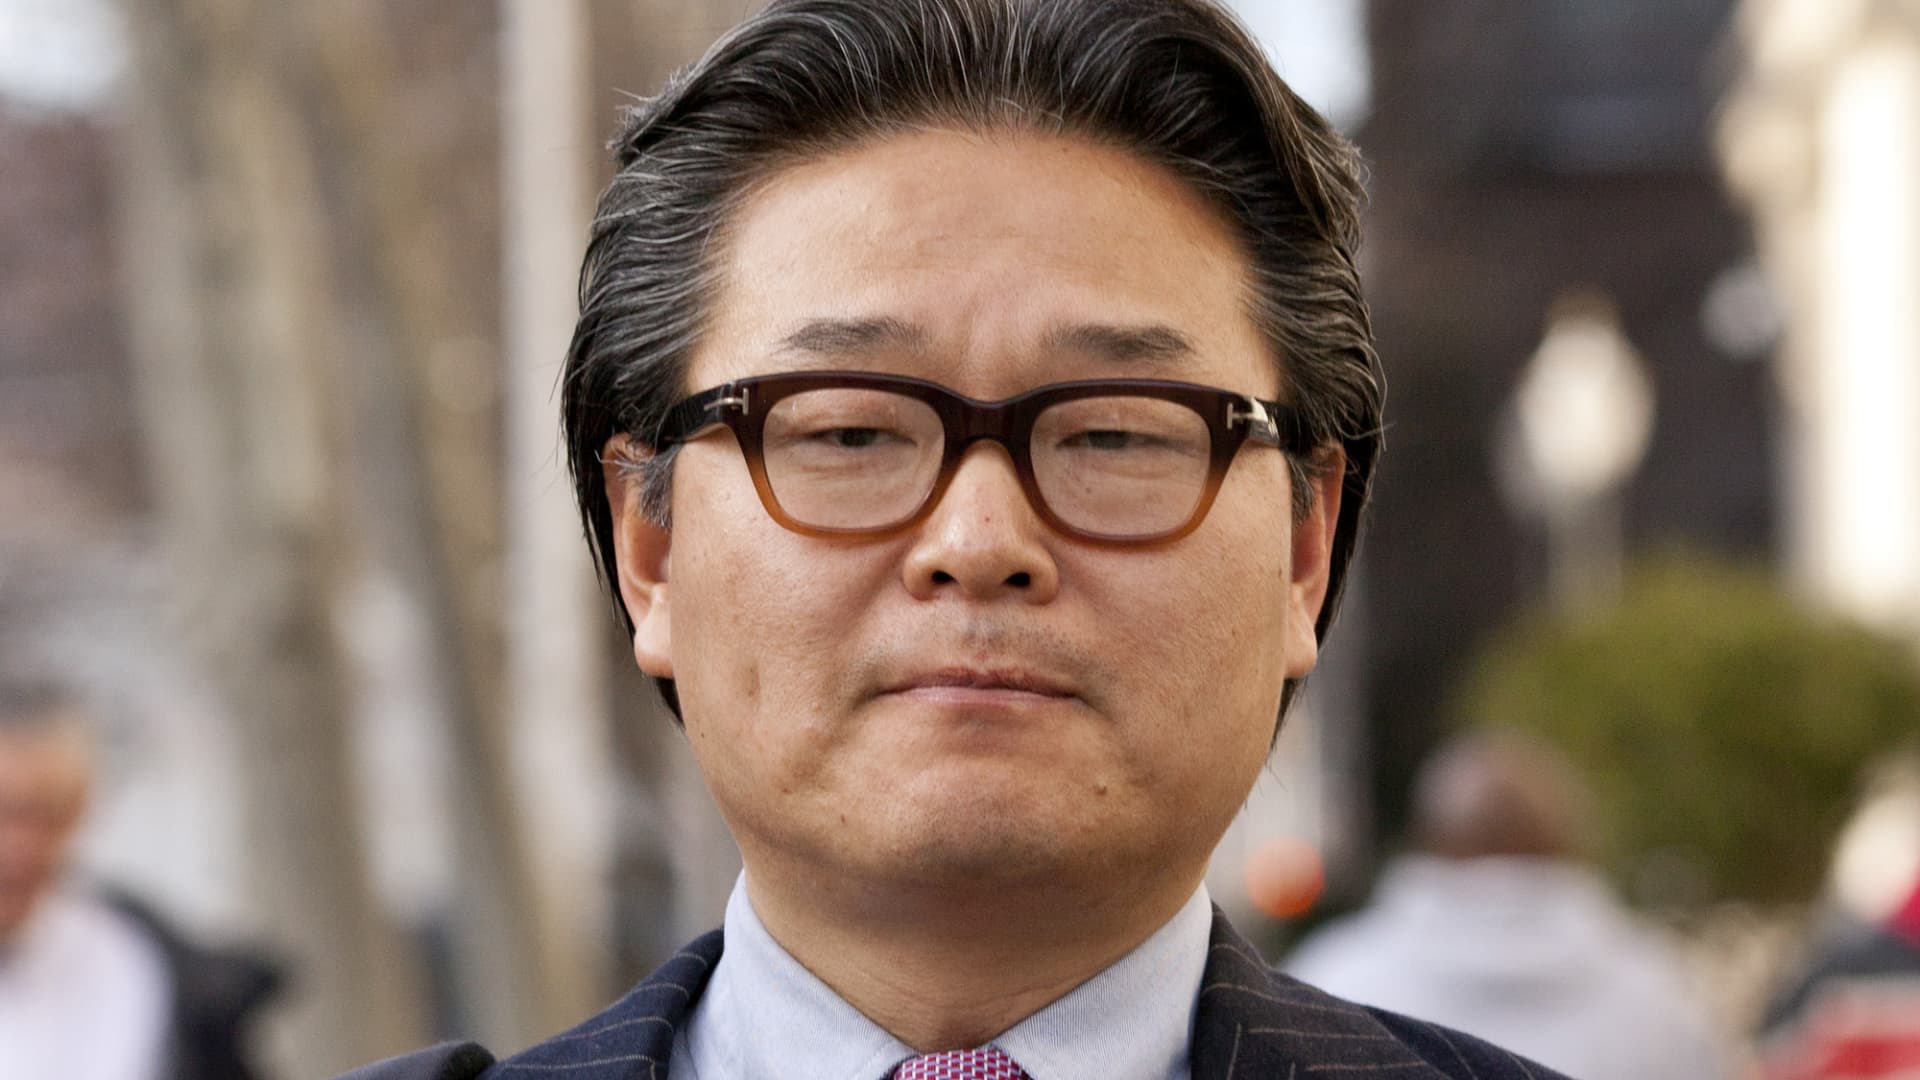 Archegos owner Bill Hwang and former CFO Halligan charged with fraud